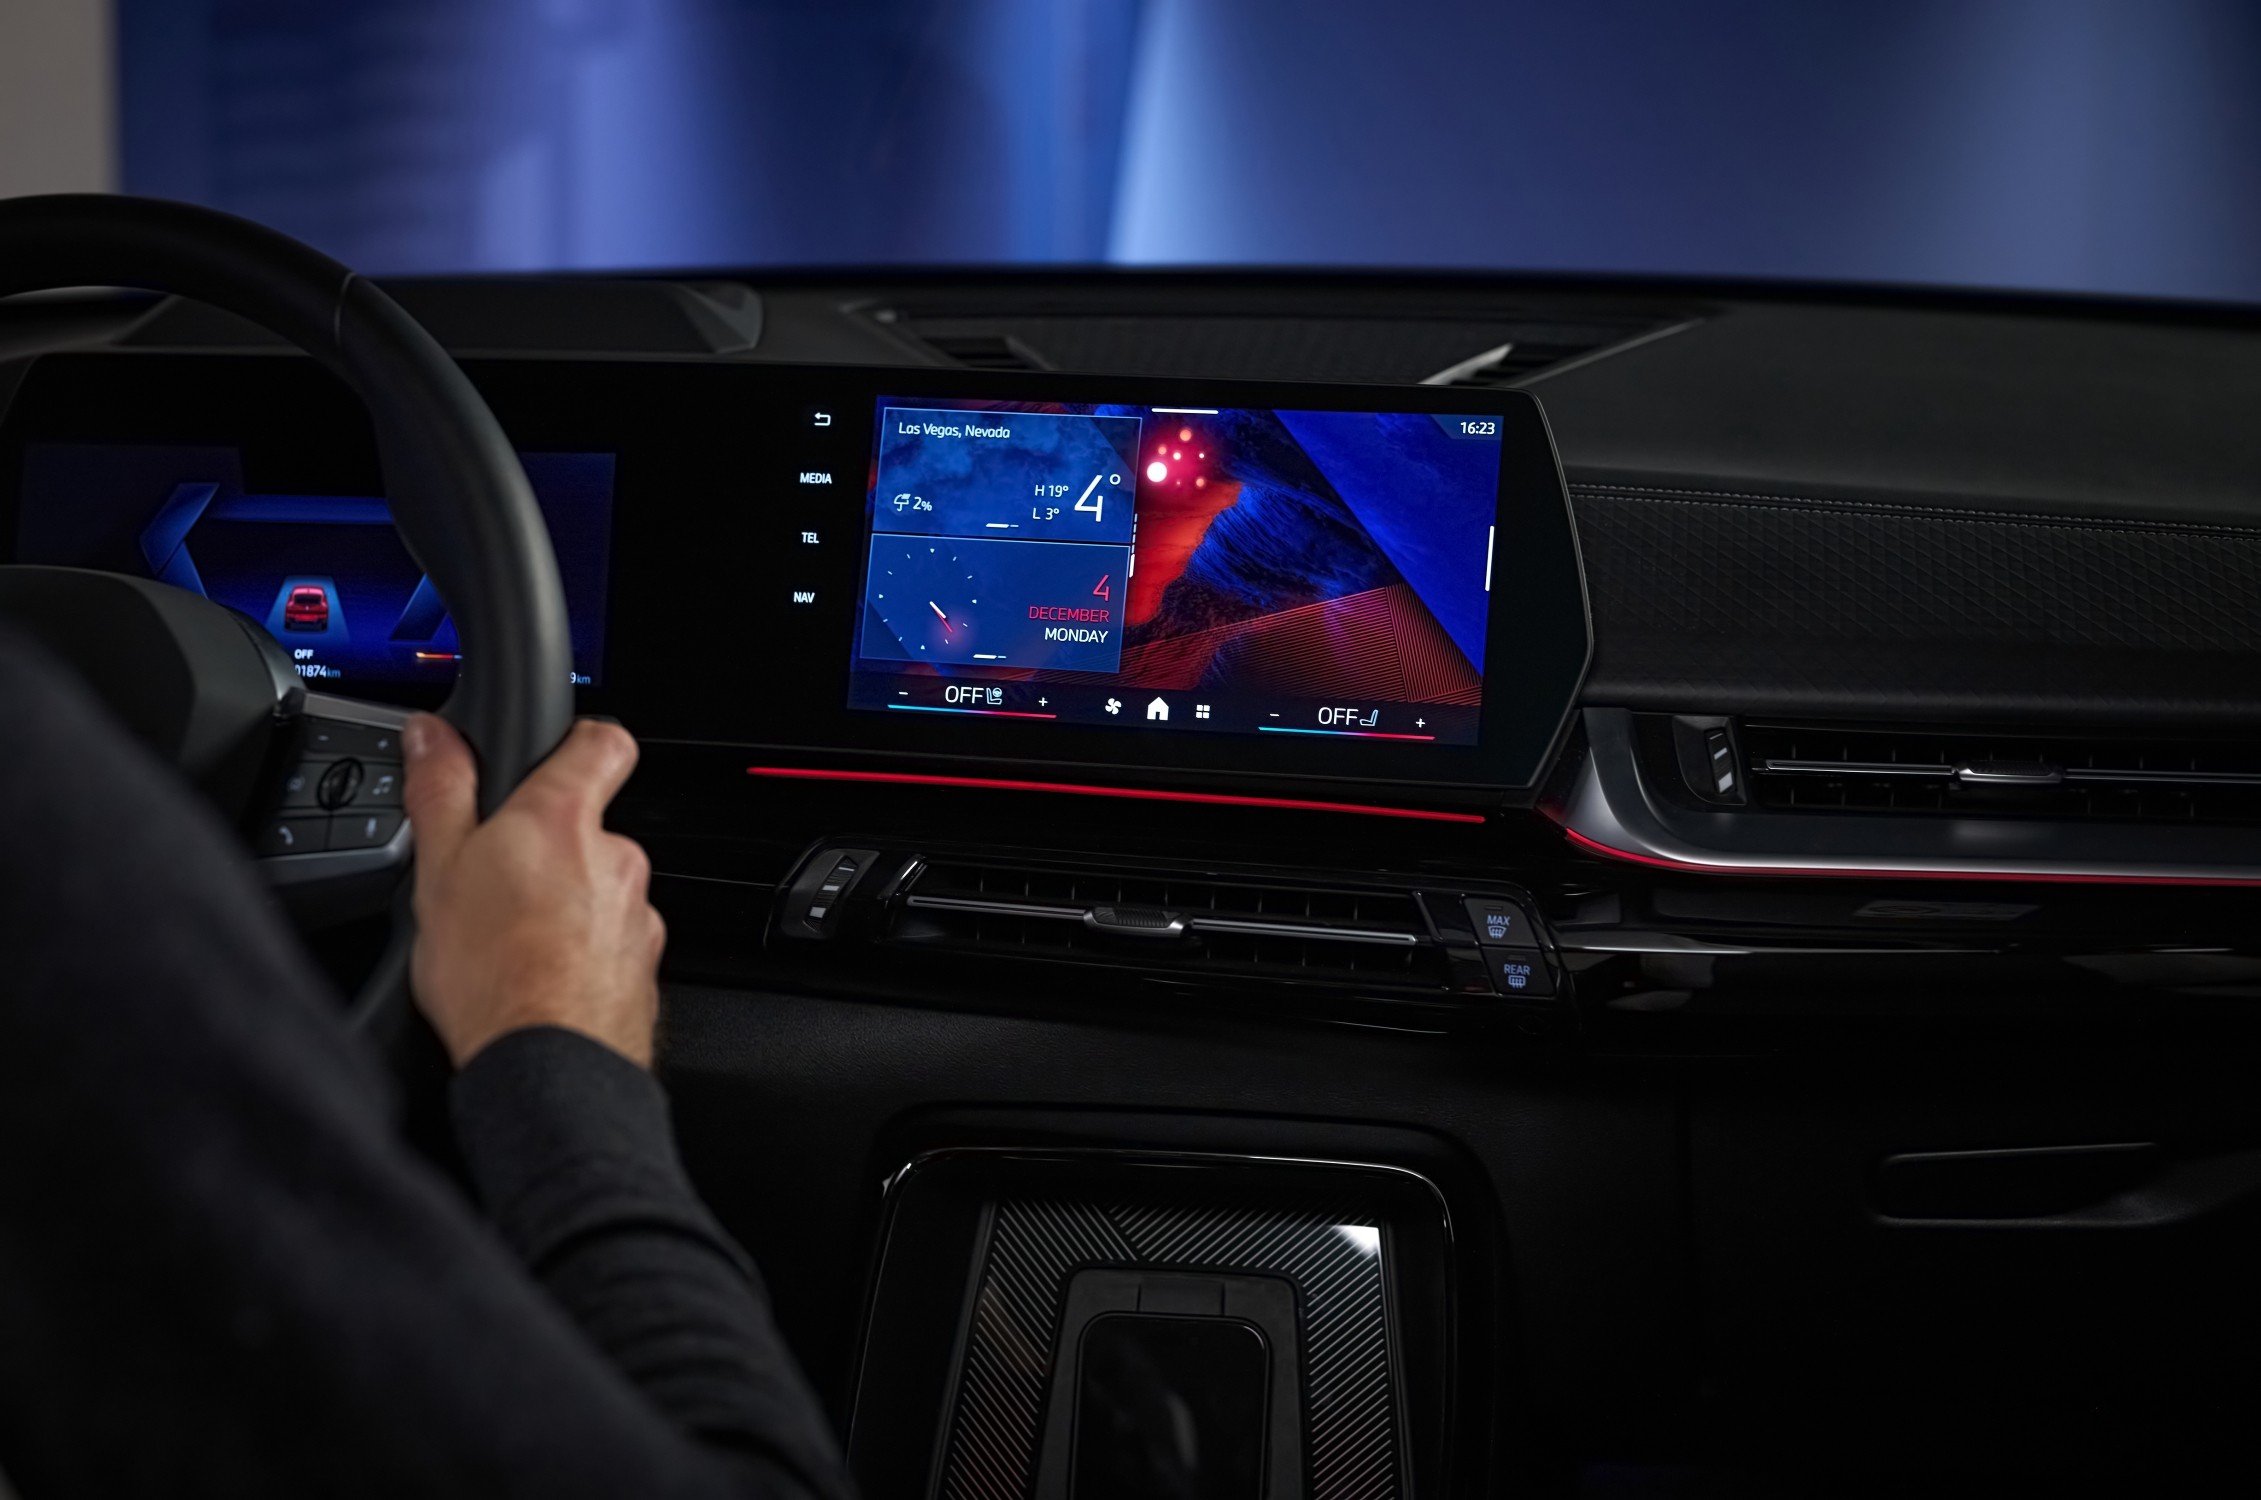 Development demo at CES 2024 BMW voice assistant becomes the ultimate vehicle expert with the help of the Alexa Large Language Model (LLM)